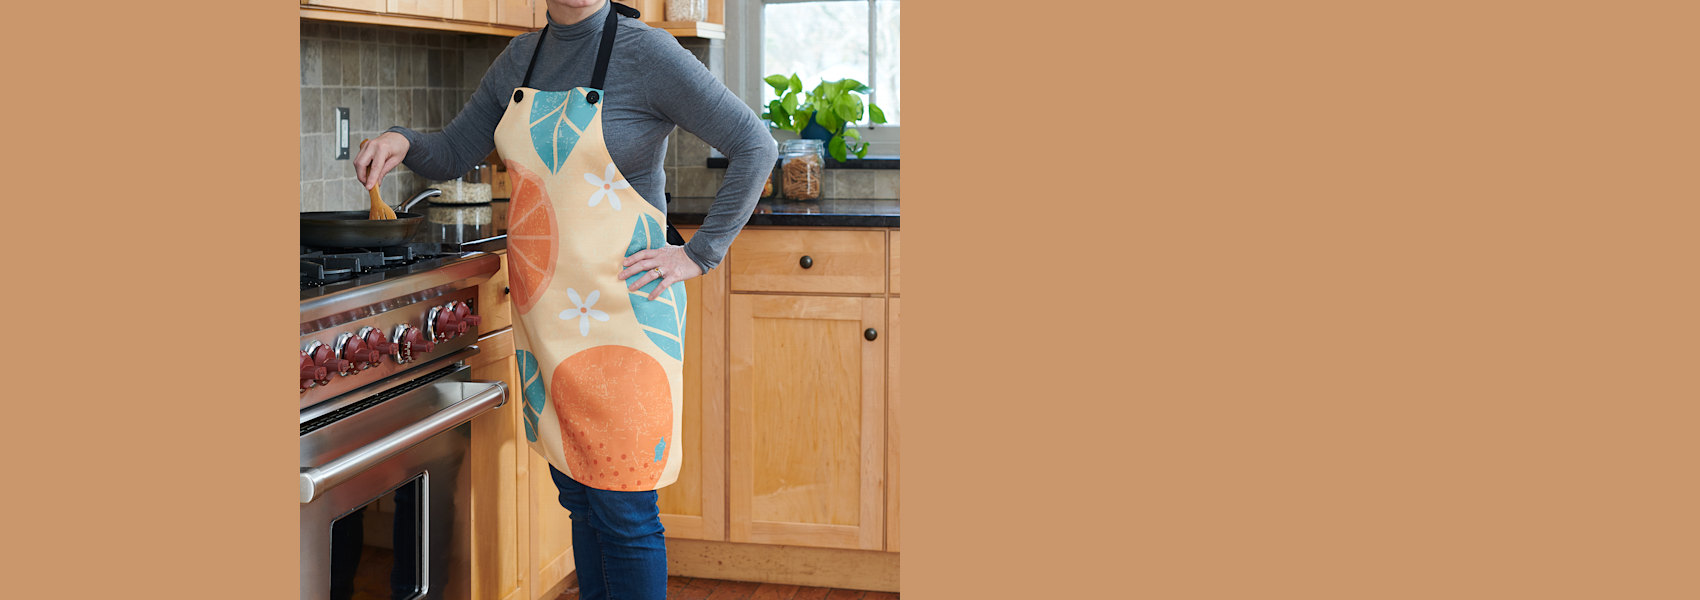 Personalised Aprons 1